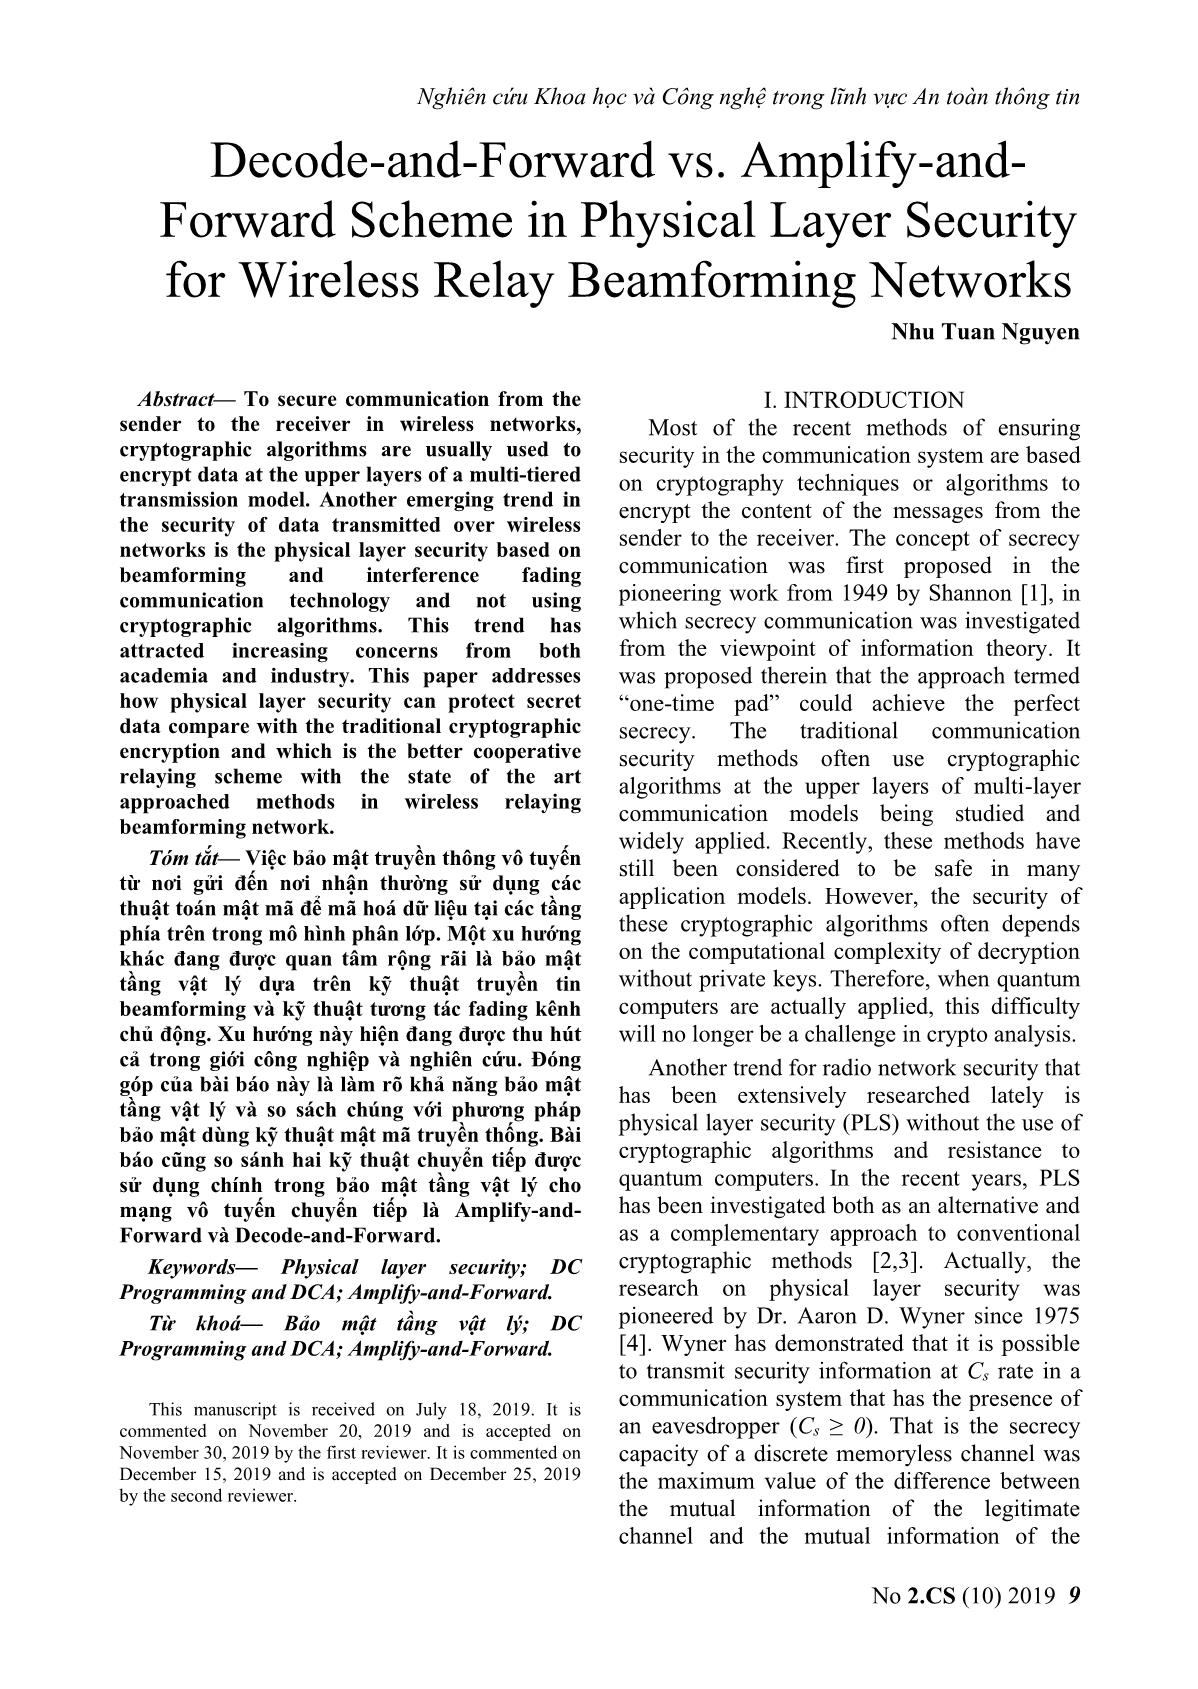 Decode - and - forward vs. amplify - andforward scheme in physical layer security for wireless relay beamforming networks trang 1